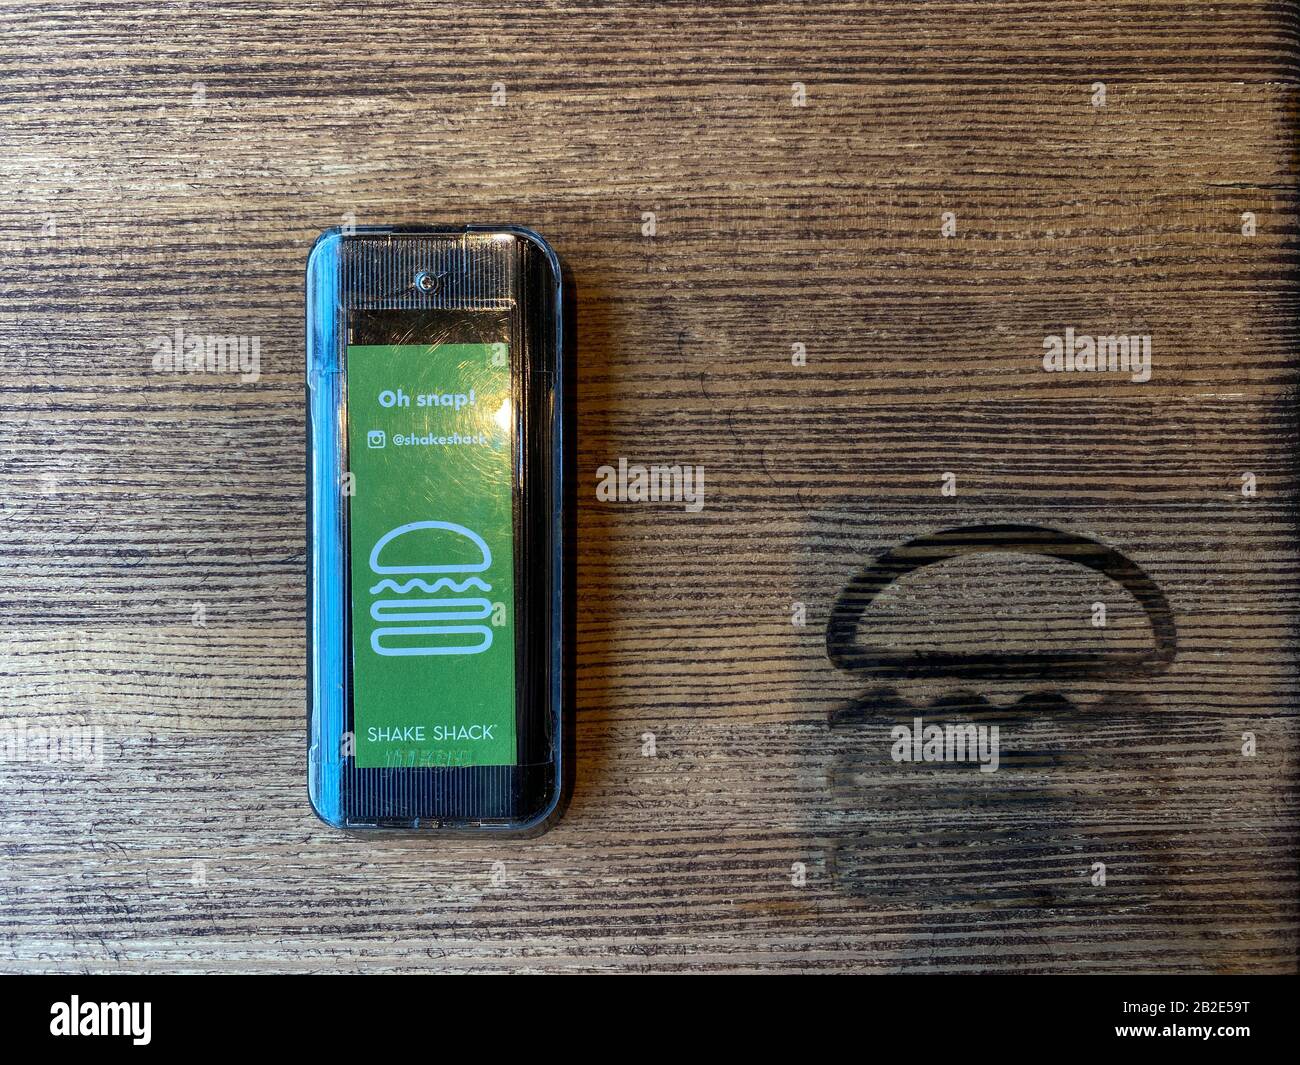 Orlando, FL/USA-1/22/20:  A pager on a wooden table at a Shake Shack restaurant.  Shake Shack is an American fast casual restaurant chain based in New Stock Photo